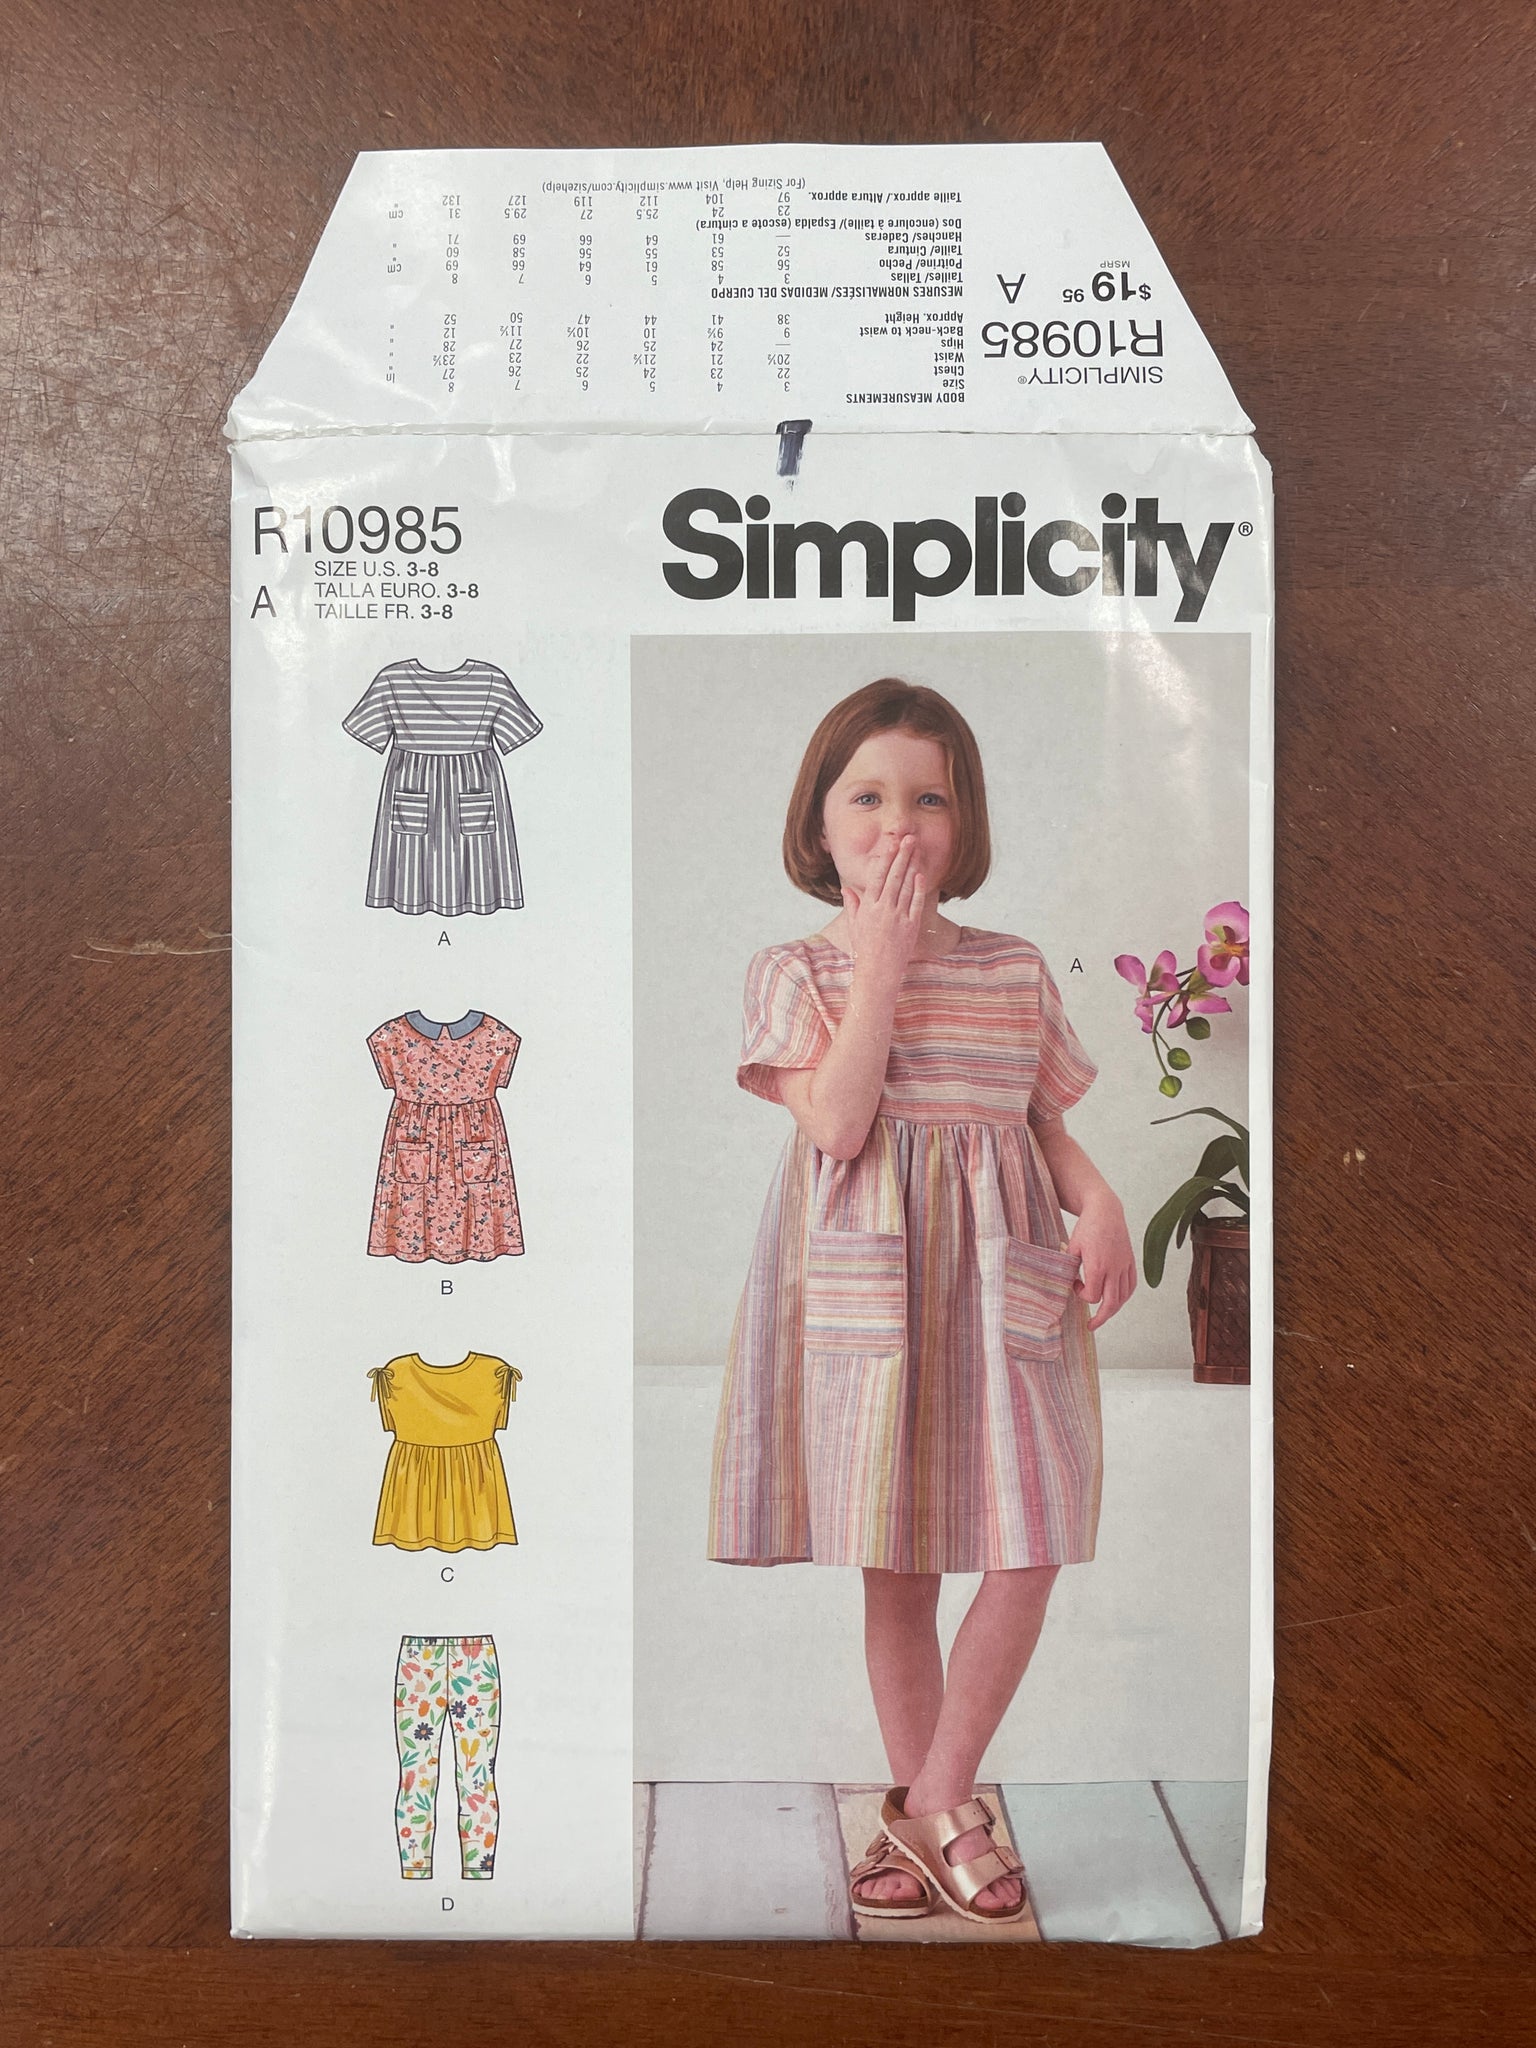 2021 Simplicity 10985 Sewing Pattern - Girl's Dresses and Leggings FACTORY FOLDED